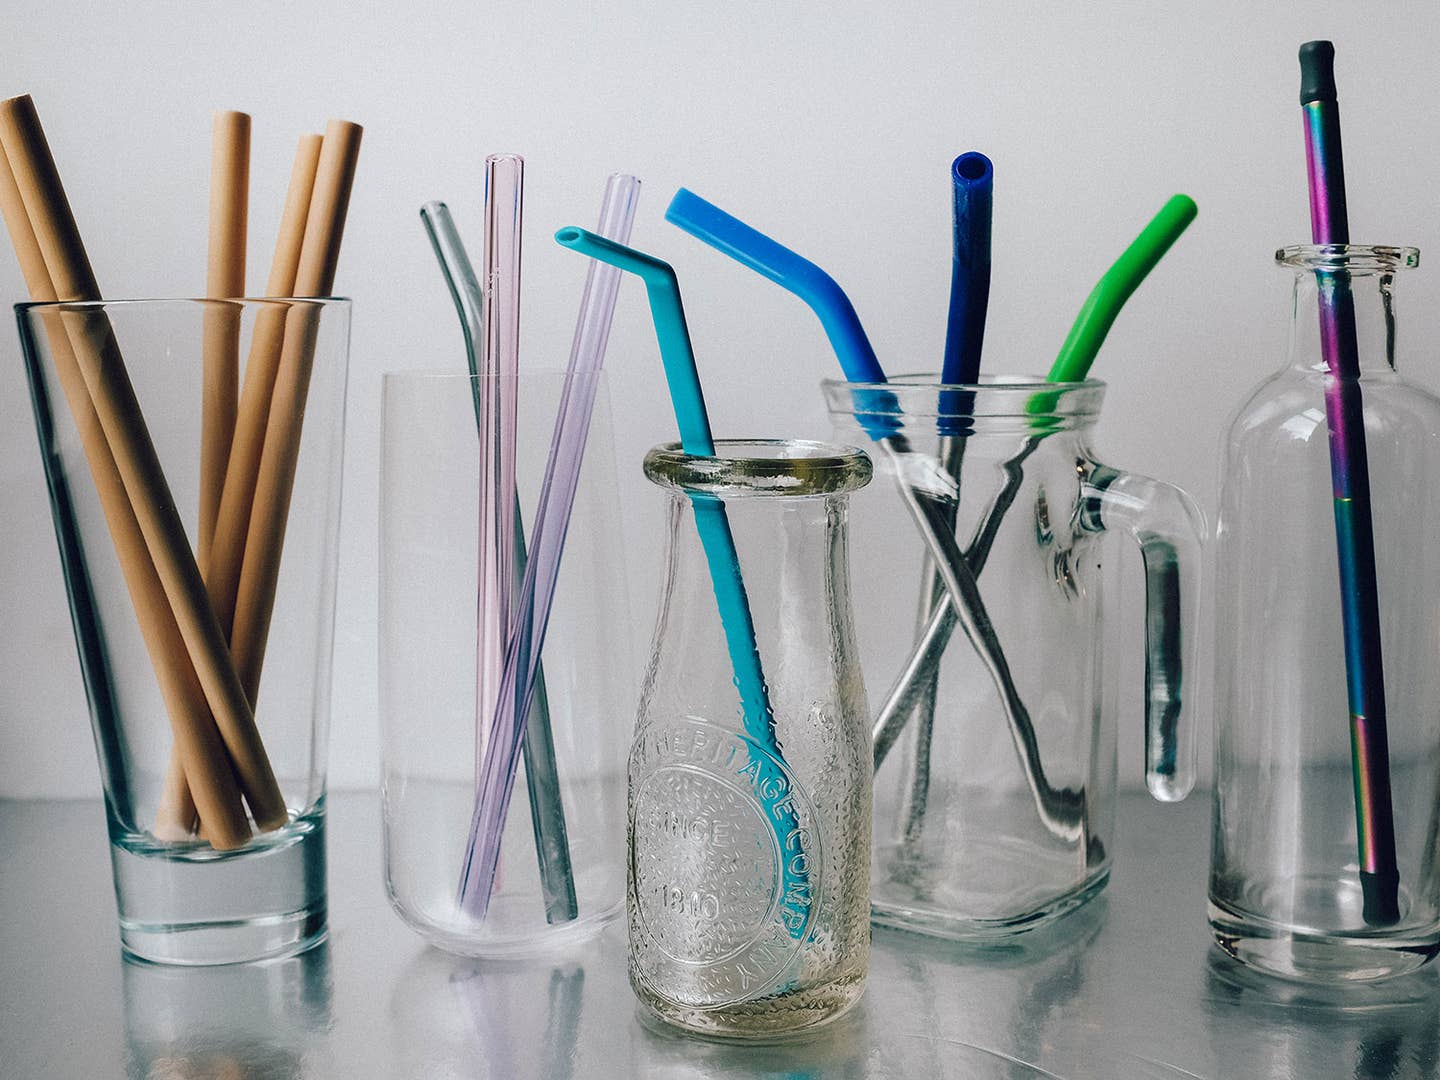 The 7 Best Reusable Straws, Tested and Reviewed